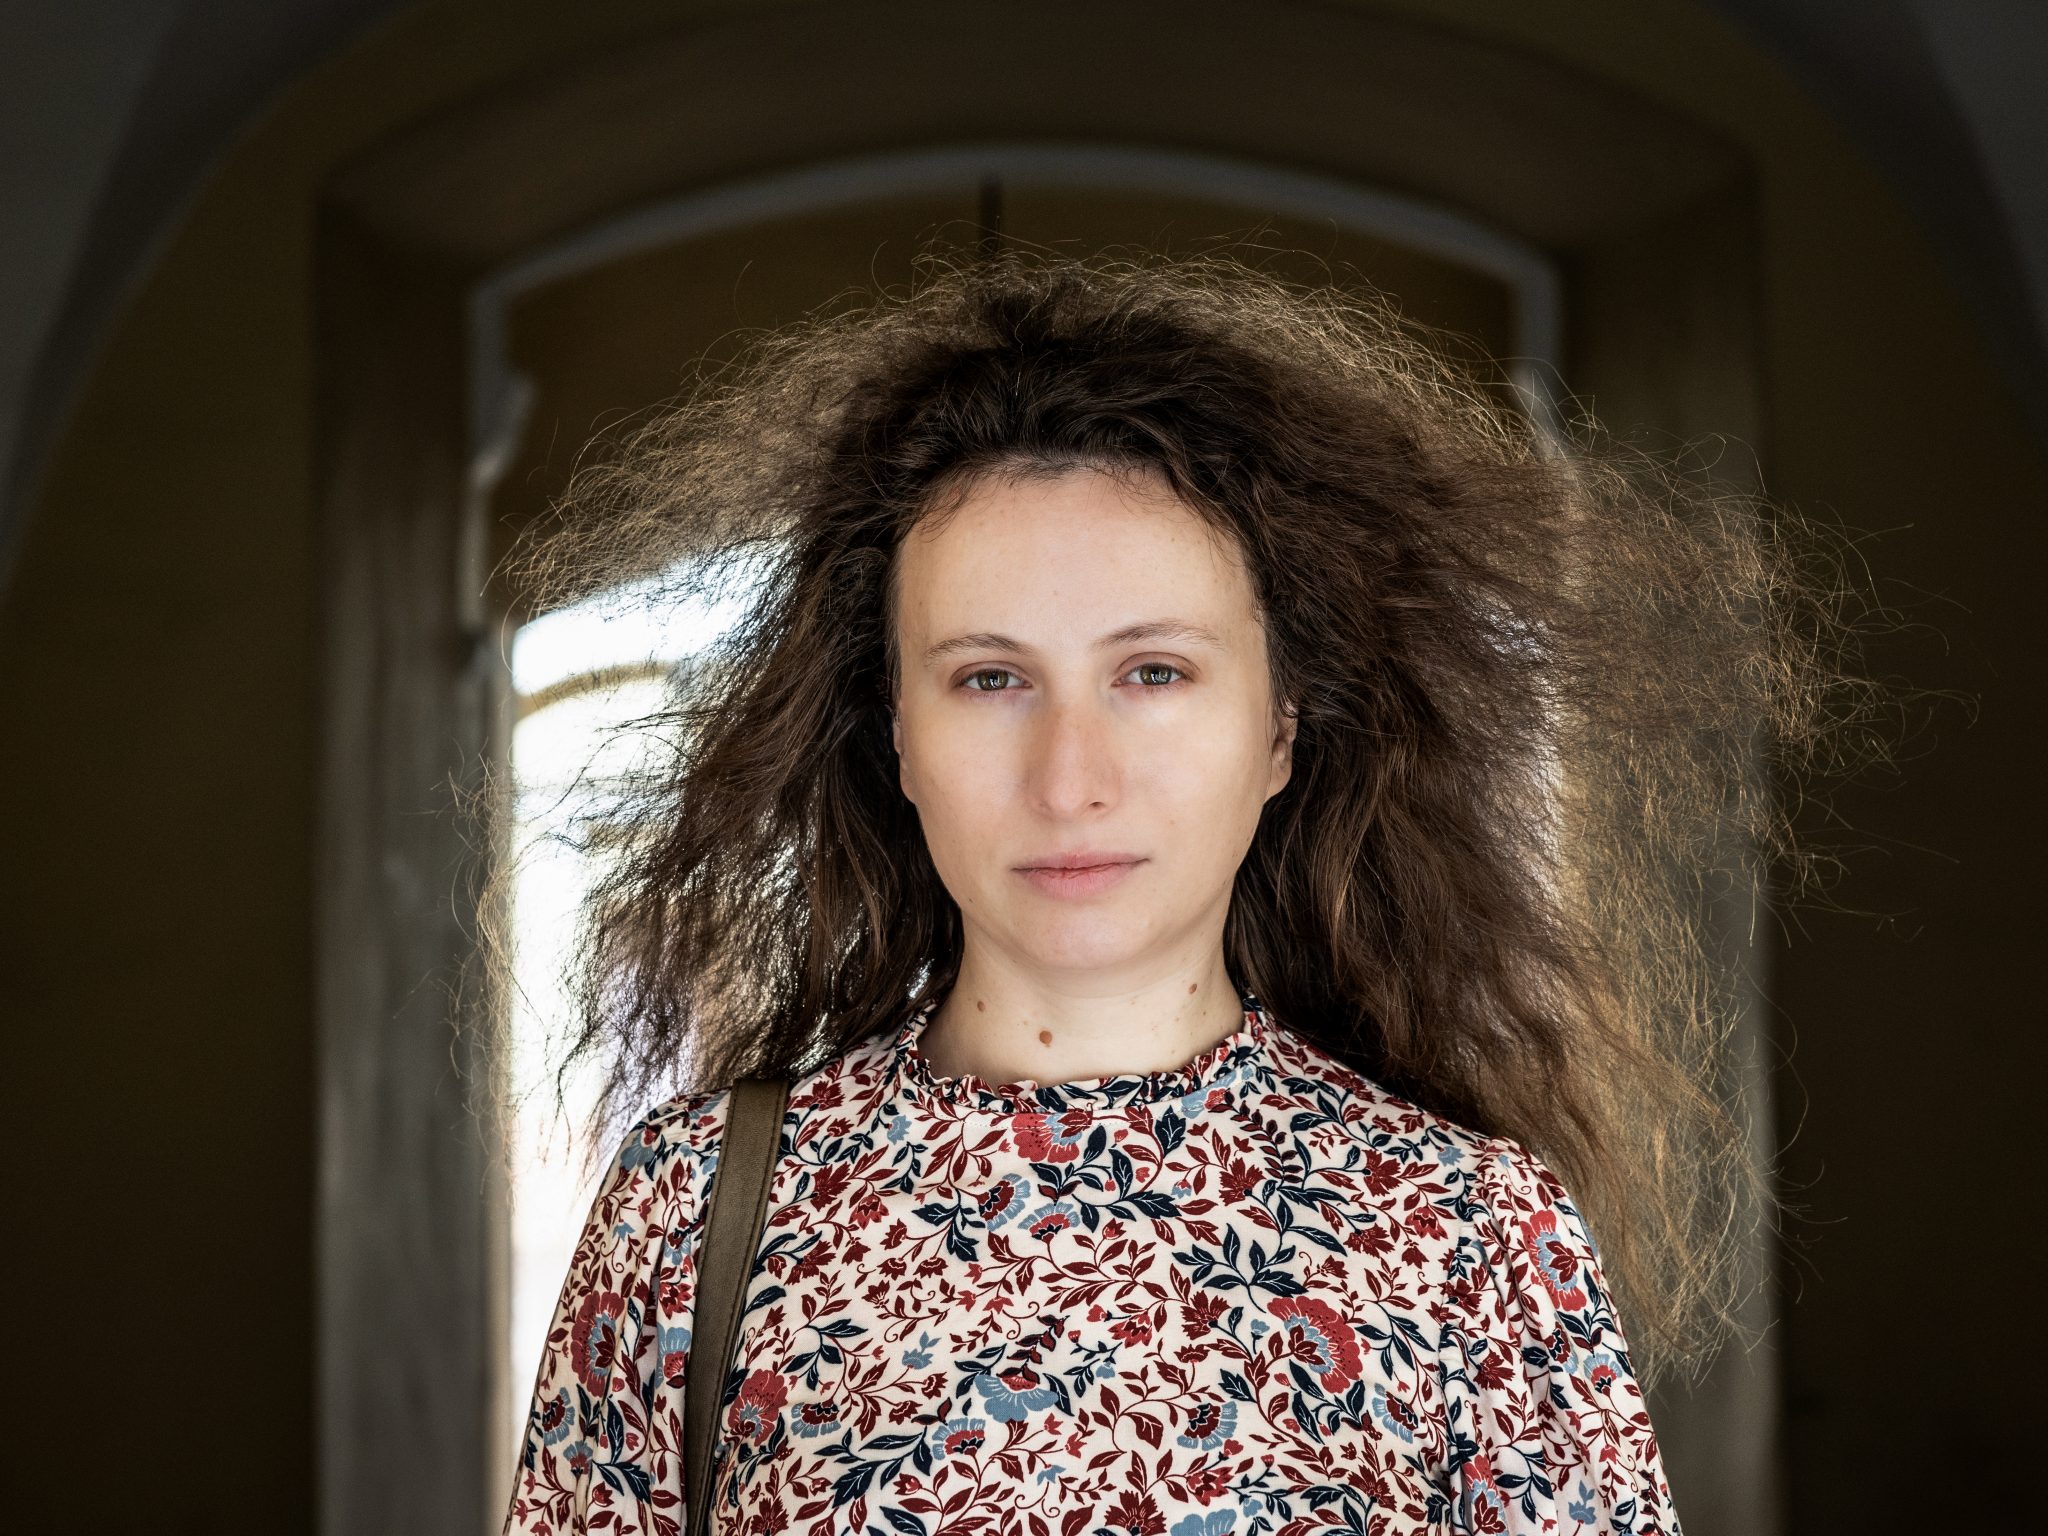 Ukrainian composer Anna Korsun has come to create music for Vilnius: “This is a unique project in my career”